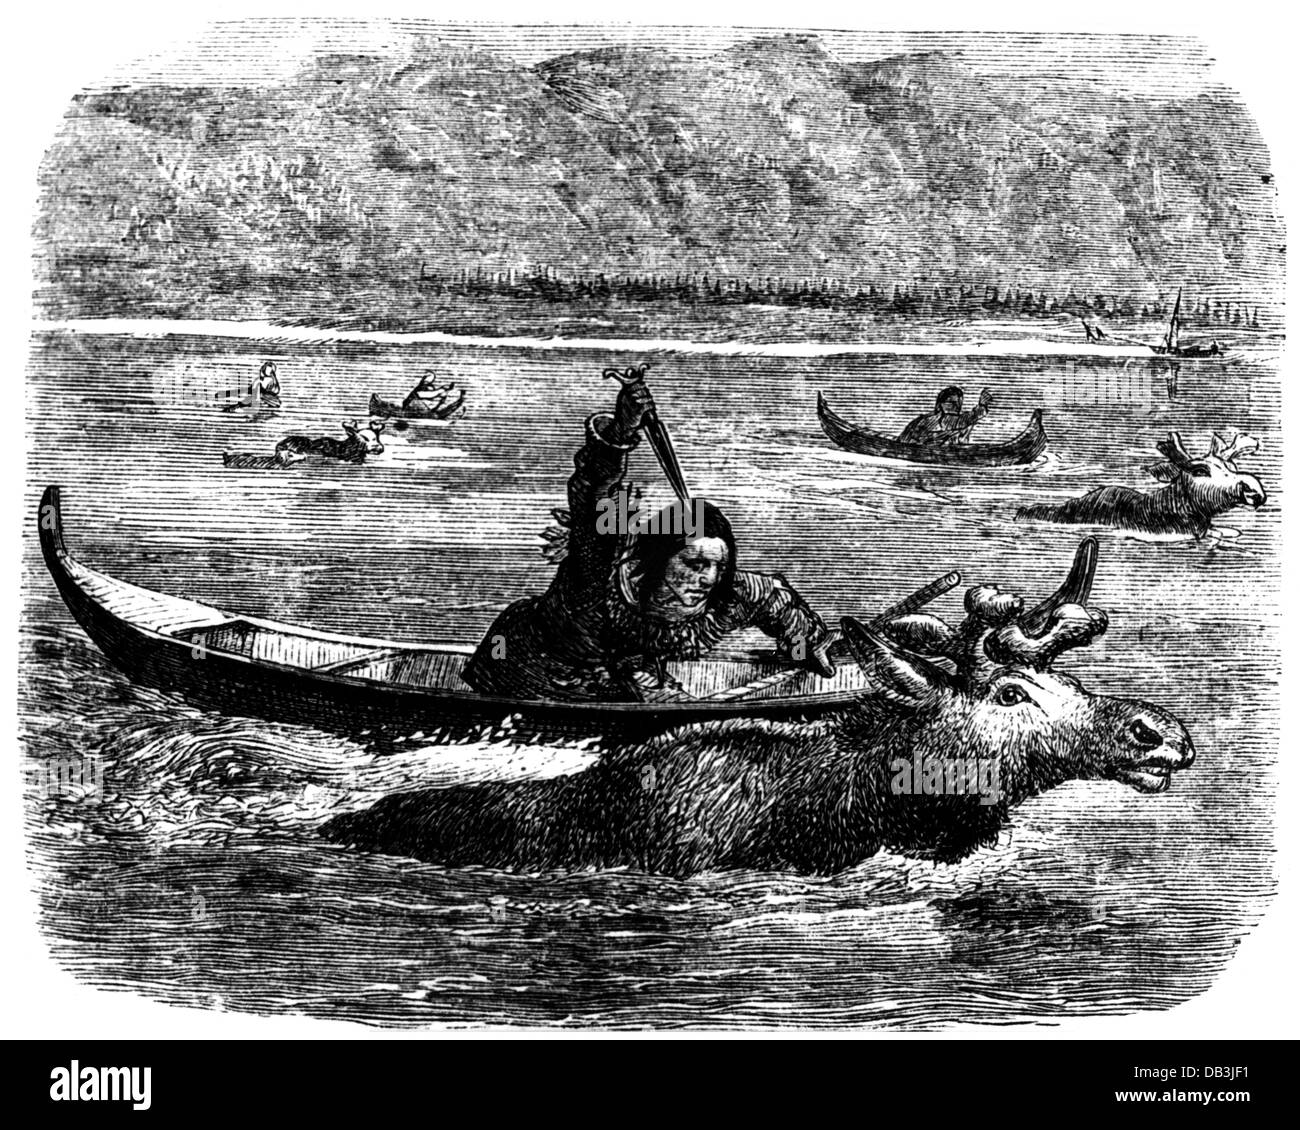 hunting, moose, North American Indians hunting mooses, Yukon, Alaska, after drawing, from: Frederick Whymper (1838 - 1901), 'Travel and Adventure in the Territory of Alaska', 1868, wood engraving, 19th century, Additional-Rights-Clearences-Not Available Stock Photo